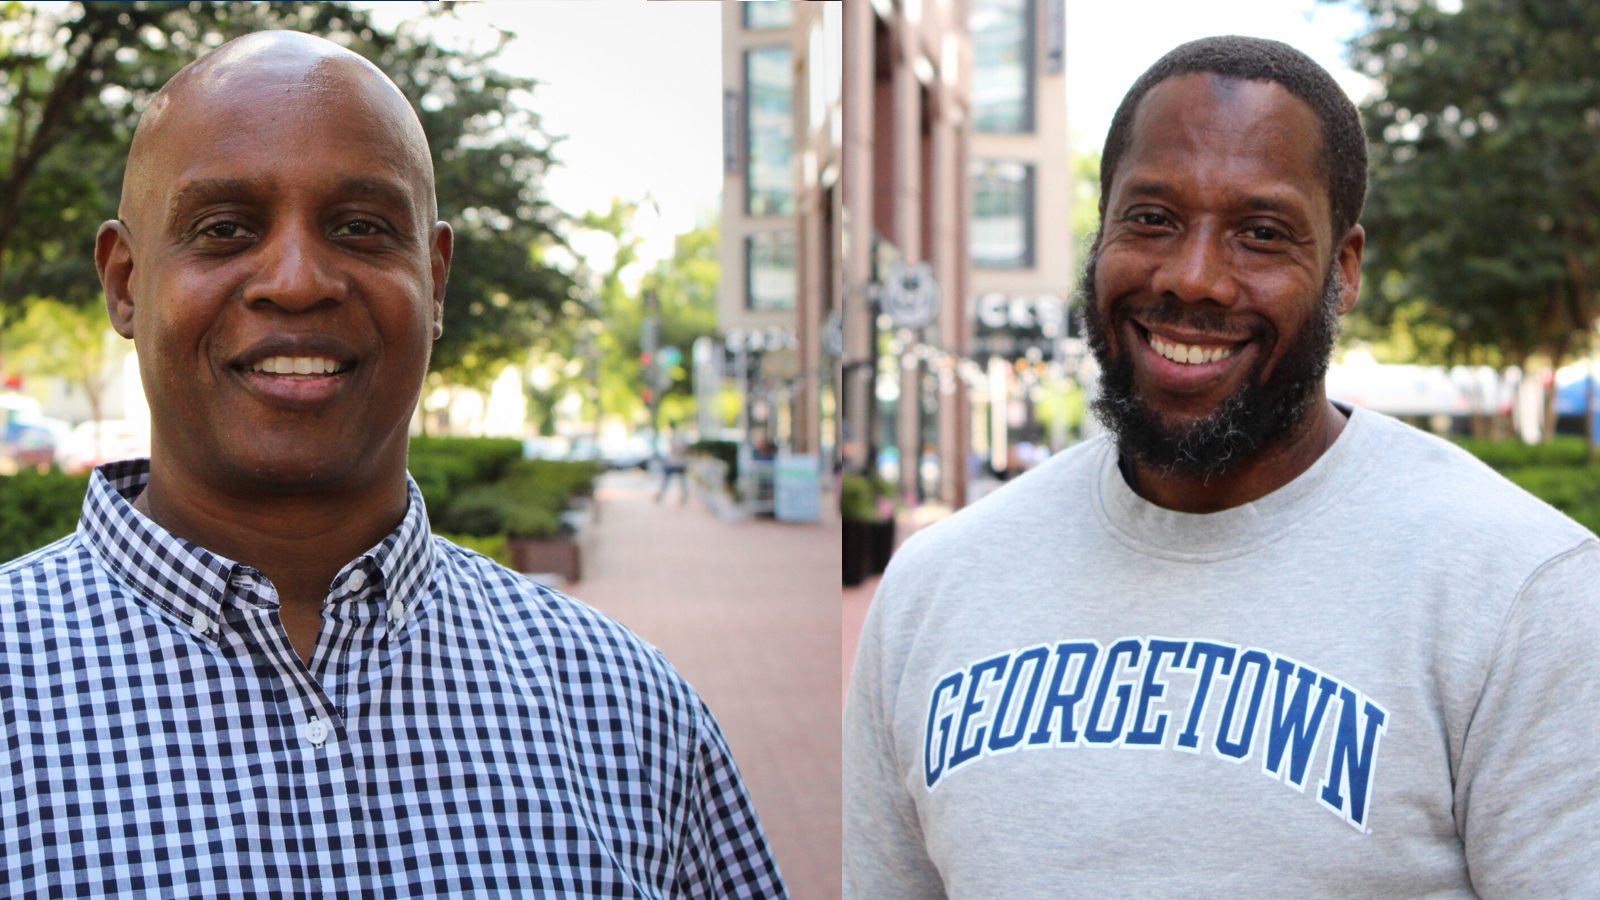 Colie Long (left) and Arlando Jones III (right) joined Georgetown's Prison and Justice Initiative staff